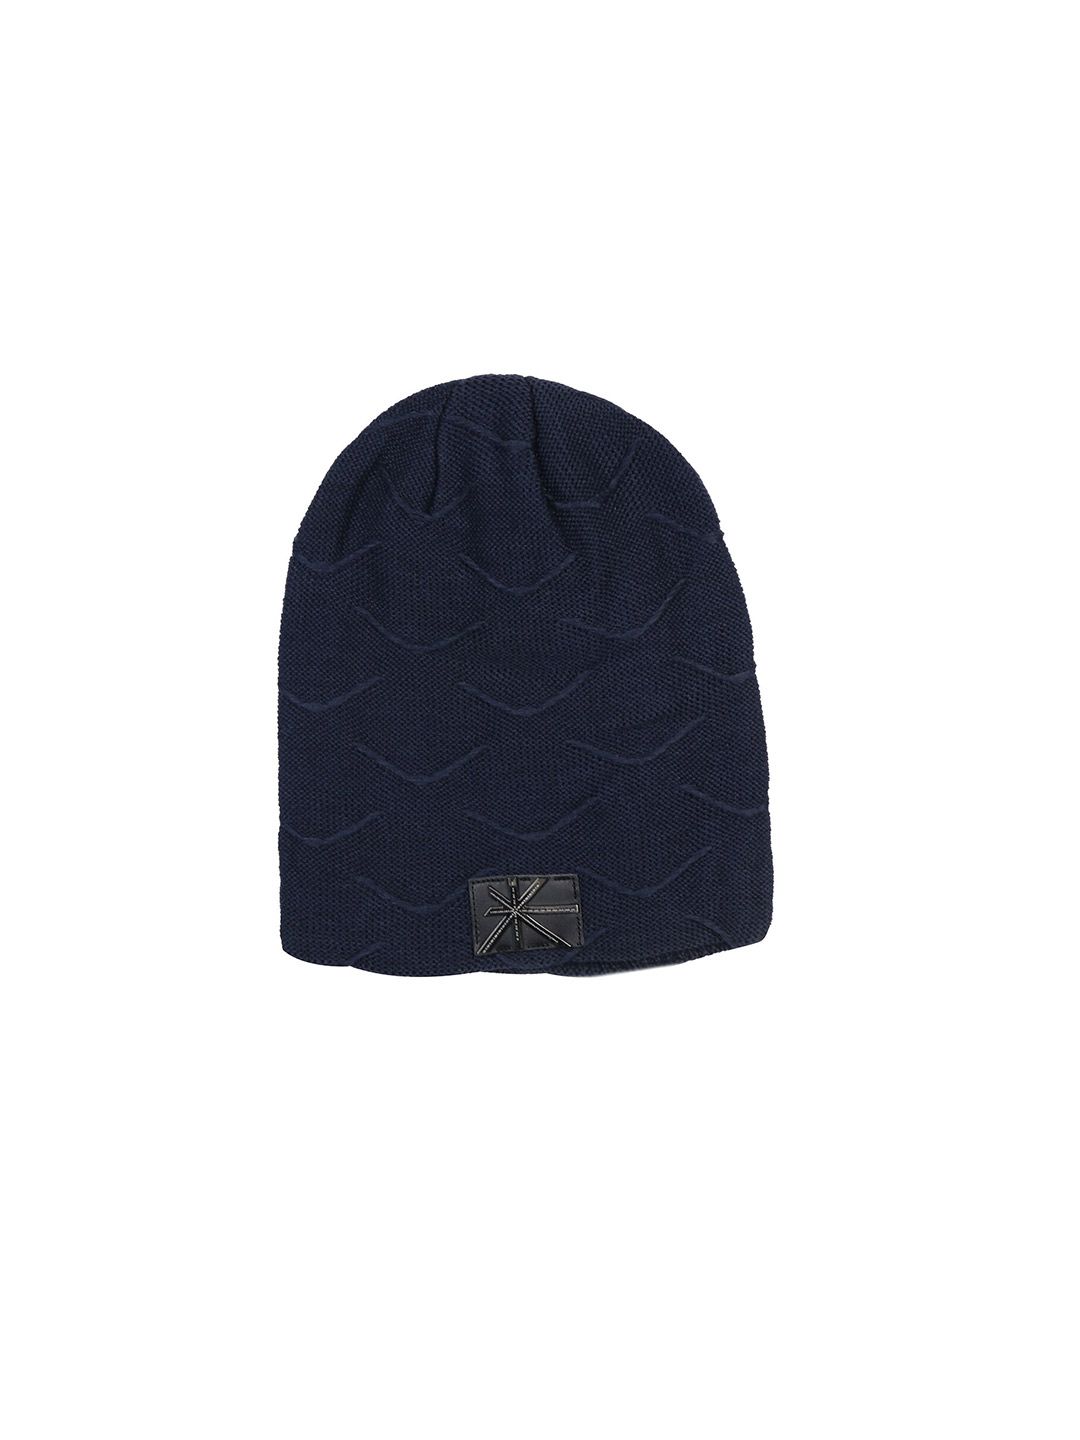 iSWEVEN Unisex Blue Solid Woolen Winter Beanie Cap Price in India